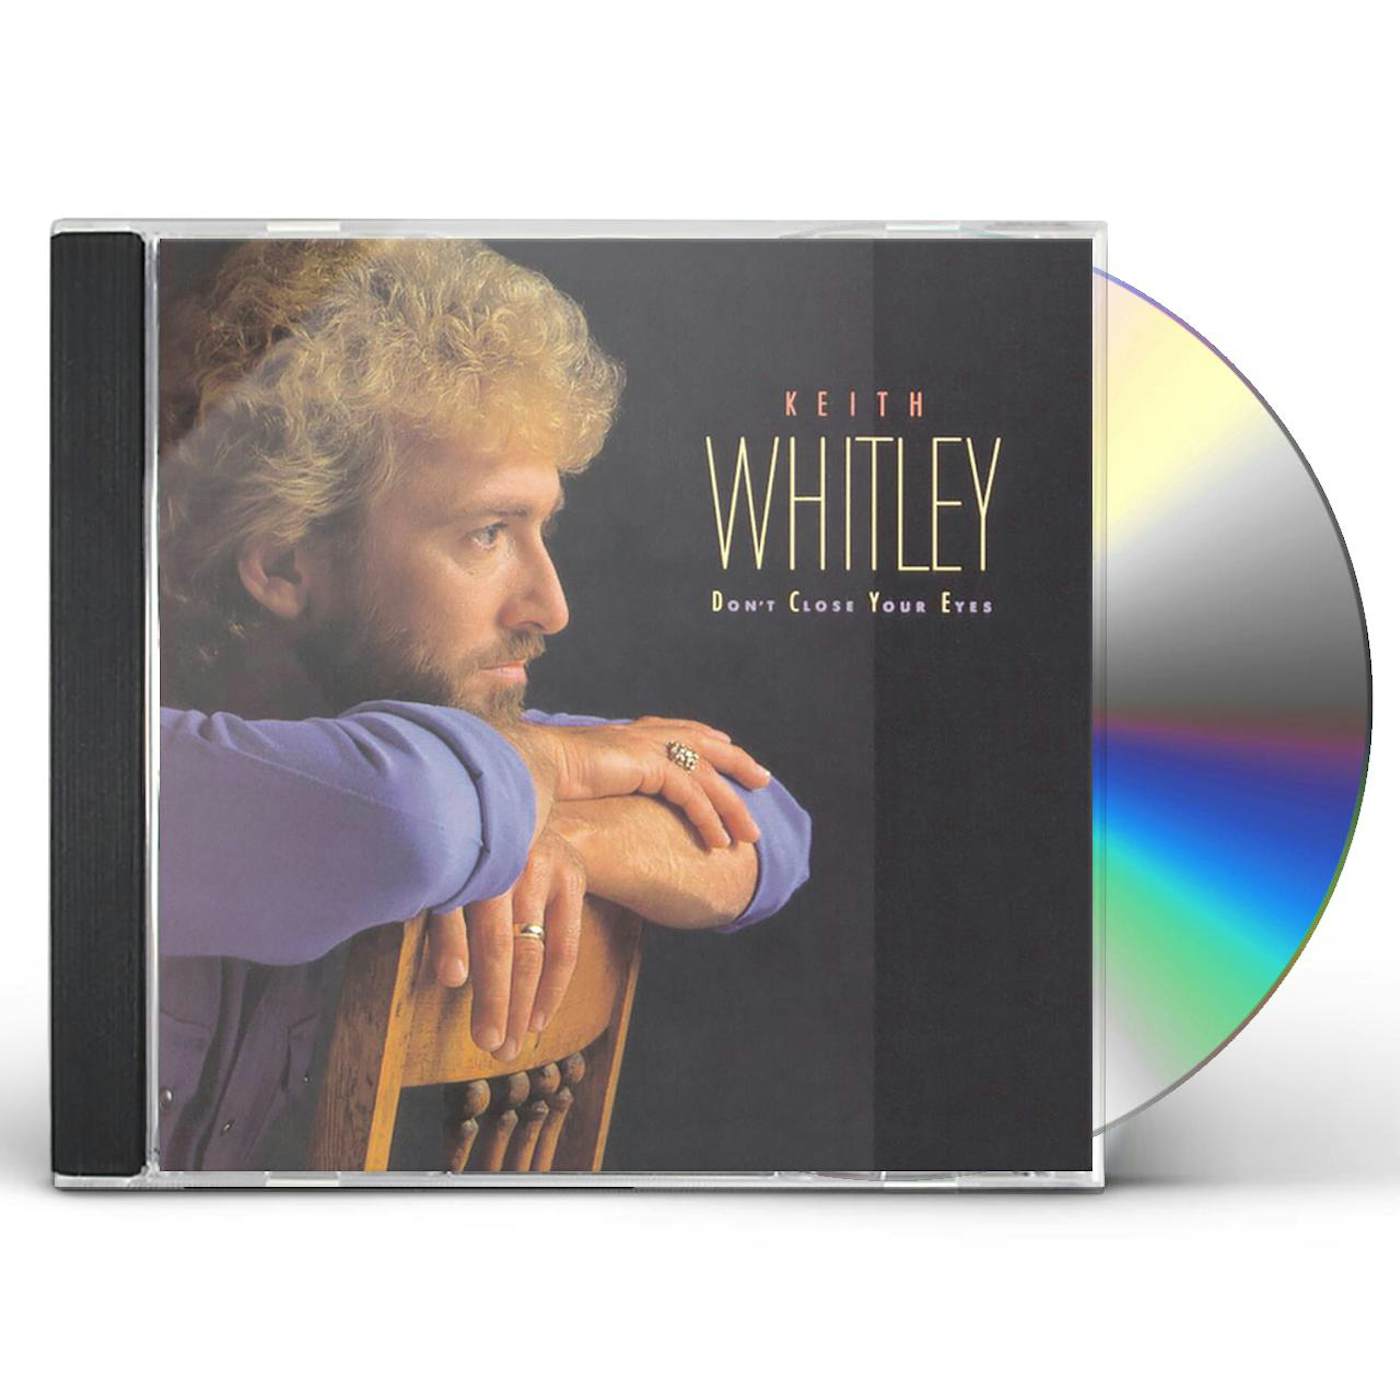 Keith Whitley DON'T CLOSE YOUR EYES CD